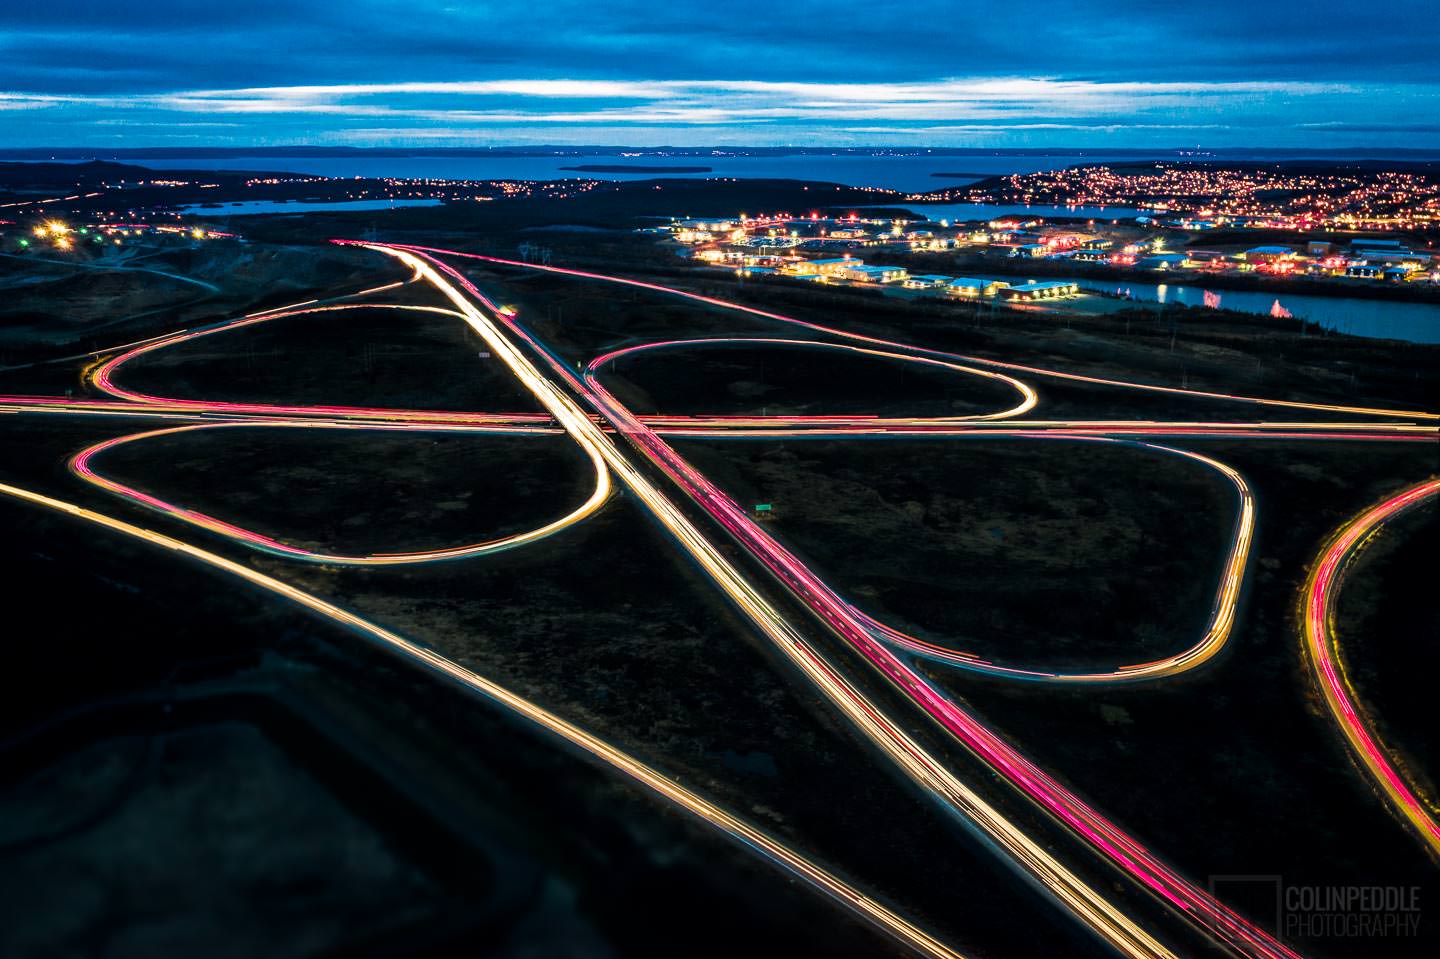 The only cloverleaf overpass in all of Newfoundland and Labrador. Pictured here in a time lapse photo with all of the traffic moving through every lane and ramp there is. One of my favorite all time photos, one I’d wanted to do for nearly 20 years.